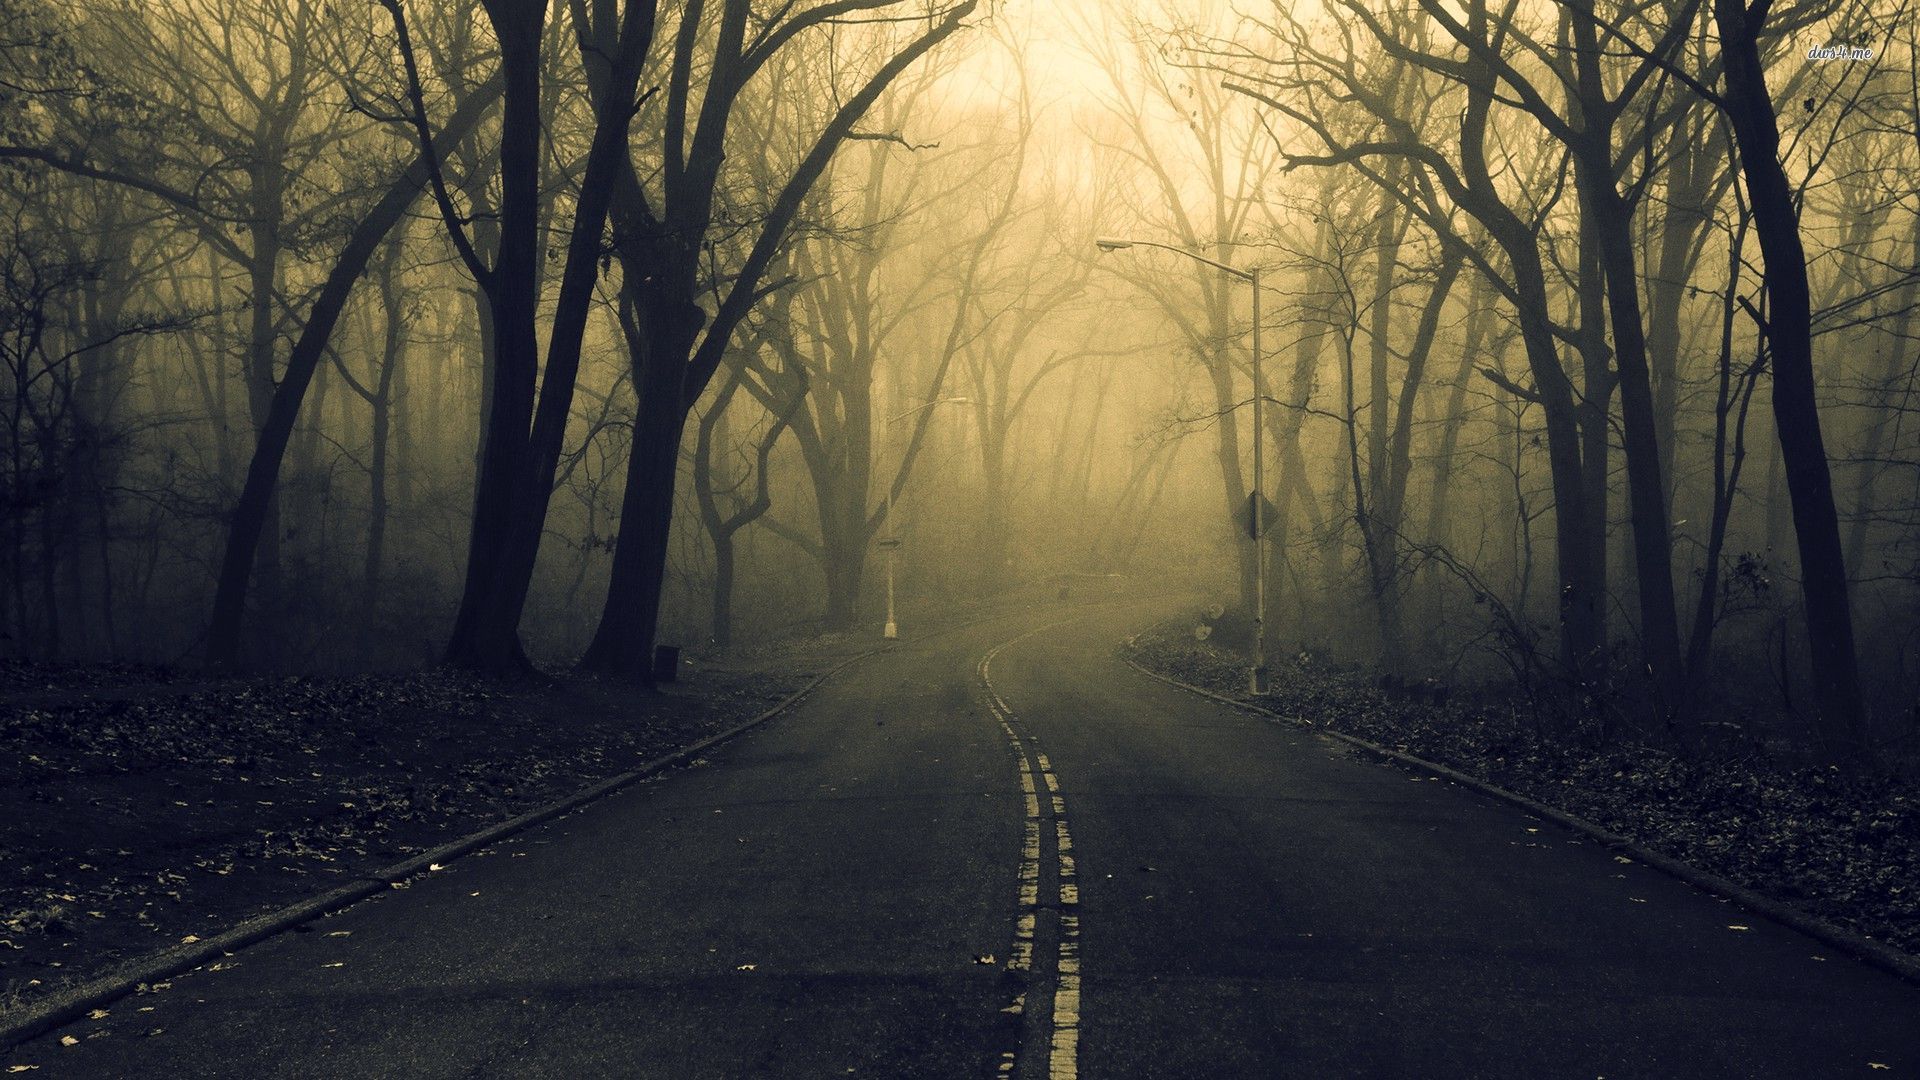 Road through the misty forest wallpaper - Nature wallpapers - #24242